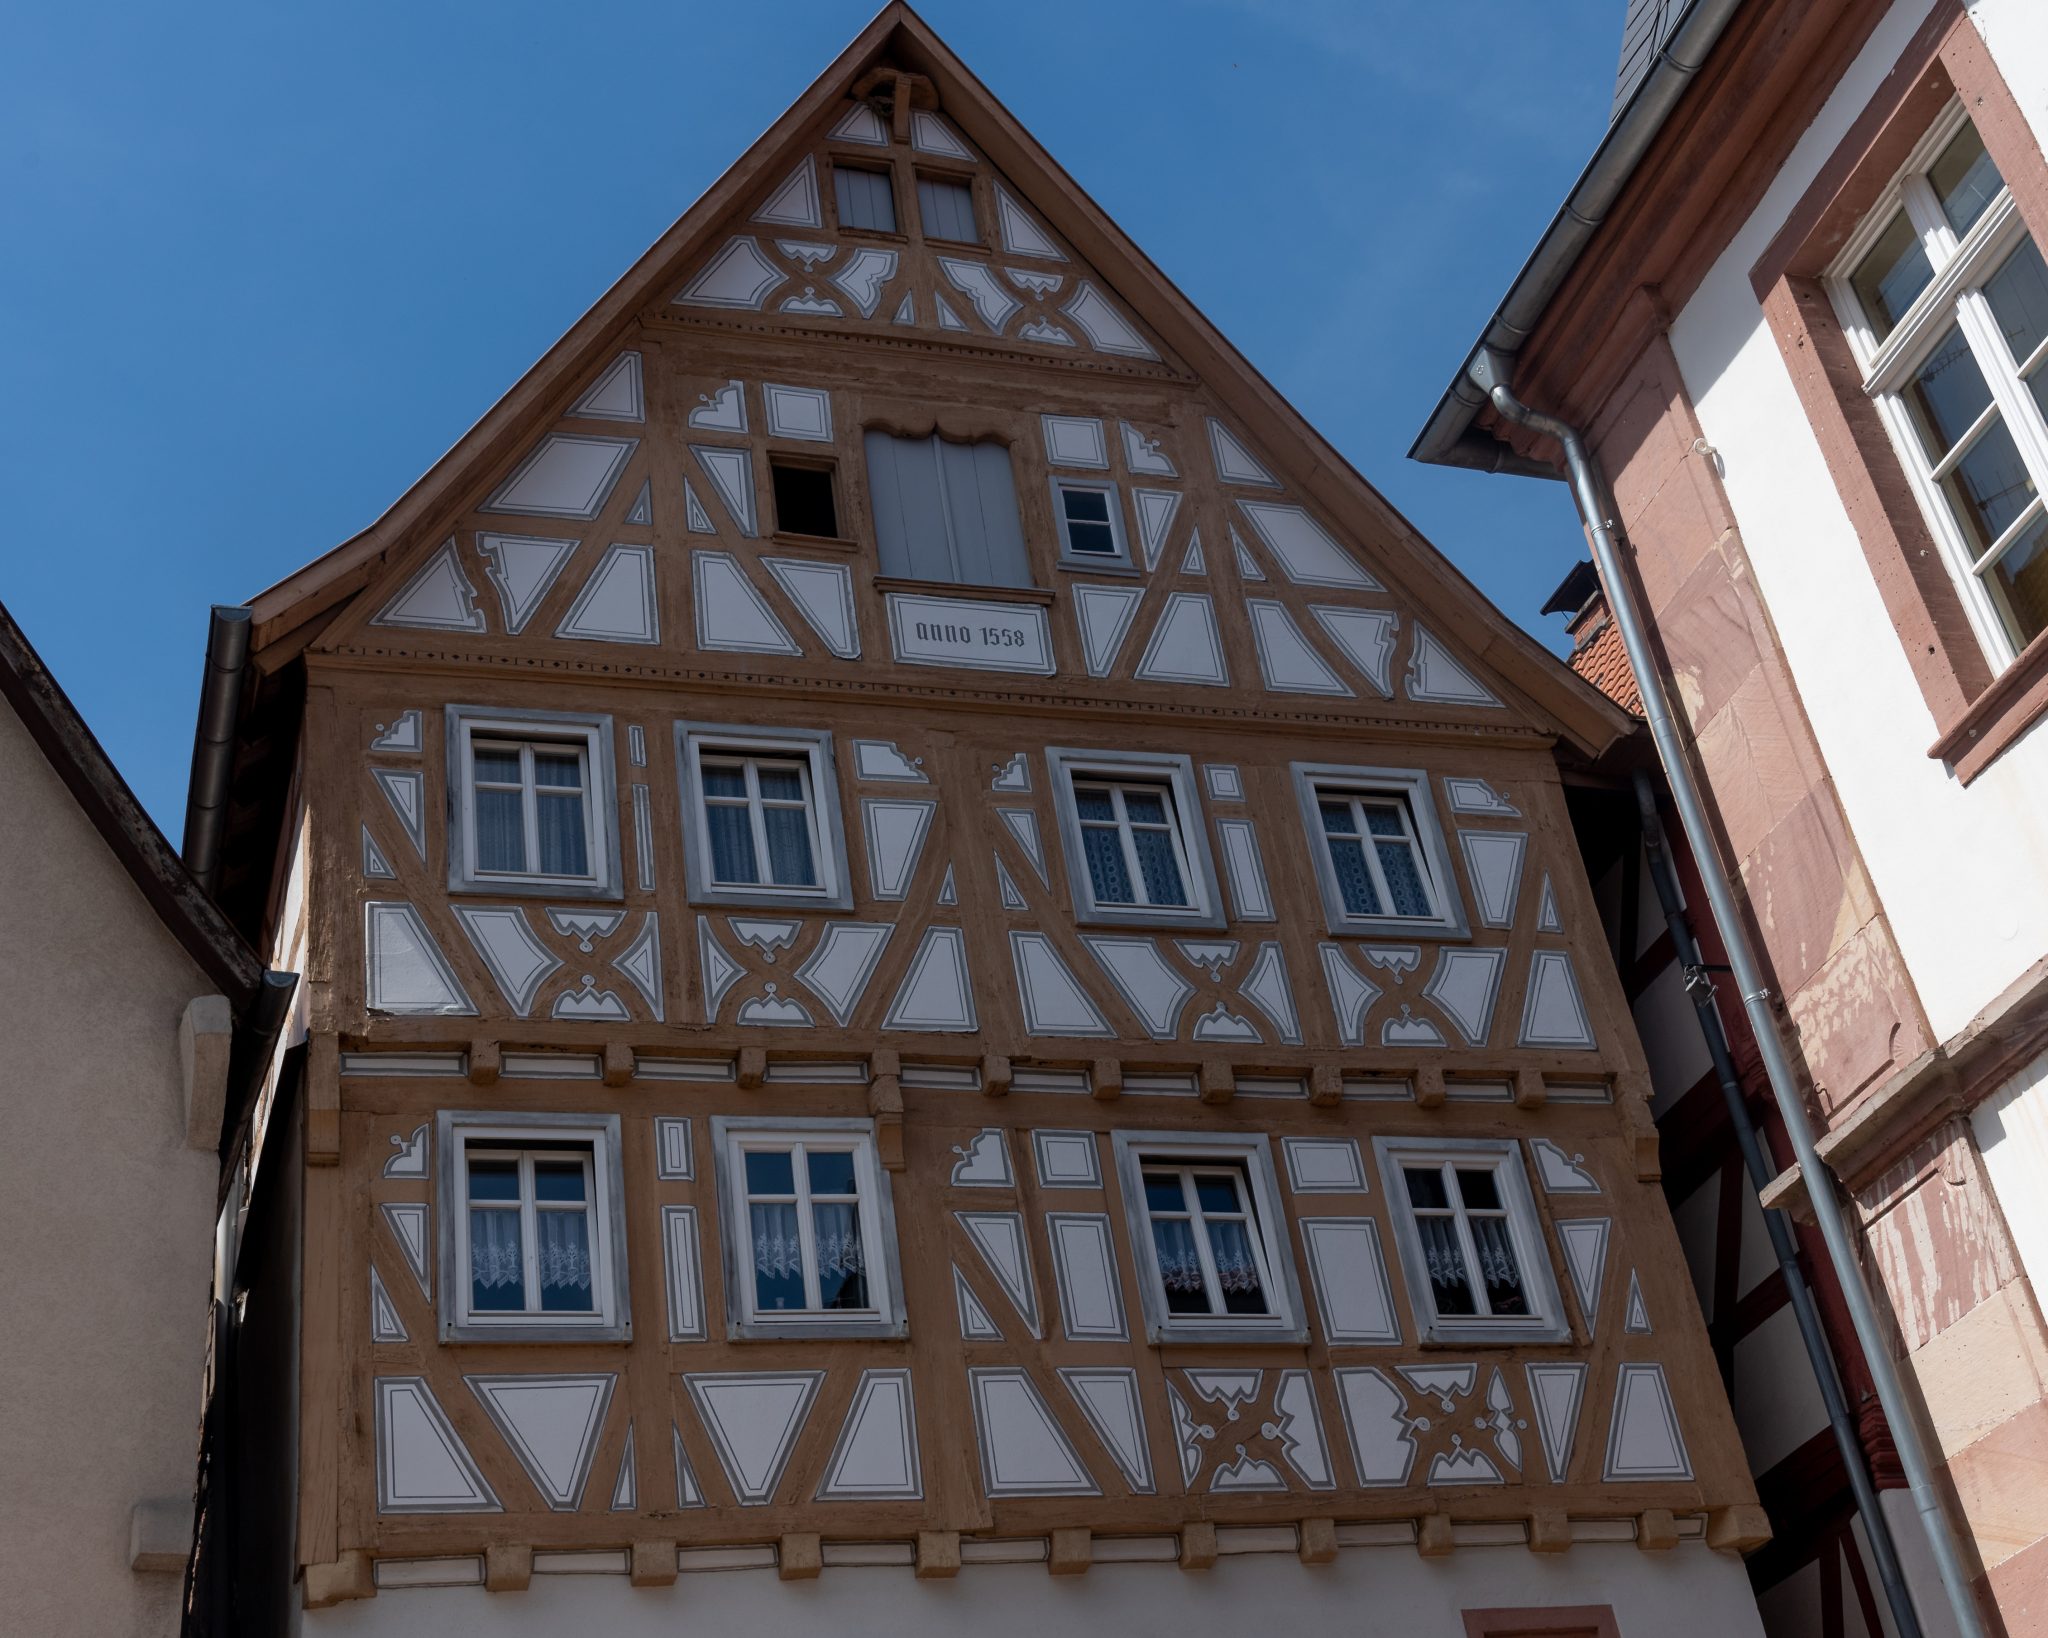 Featuring windows on a old house in Neckargemünd, Germany